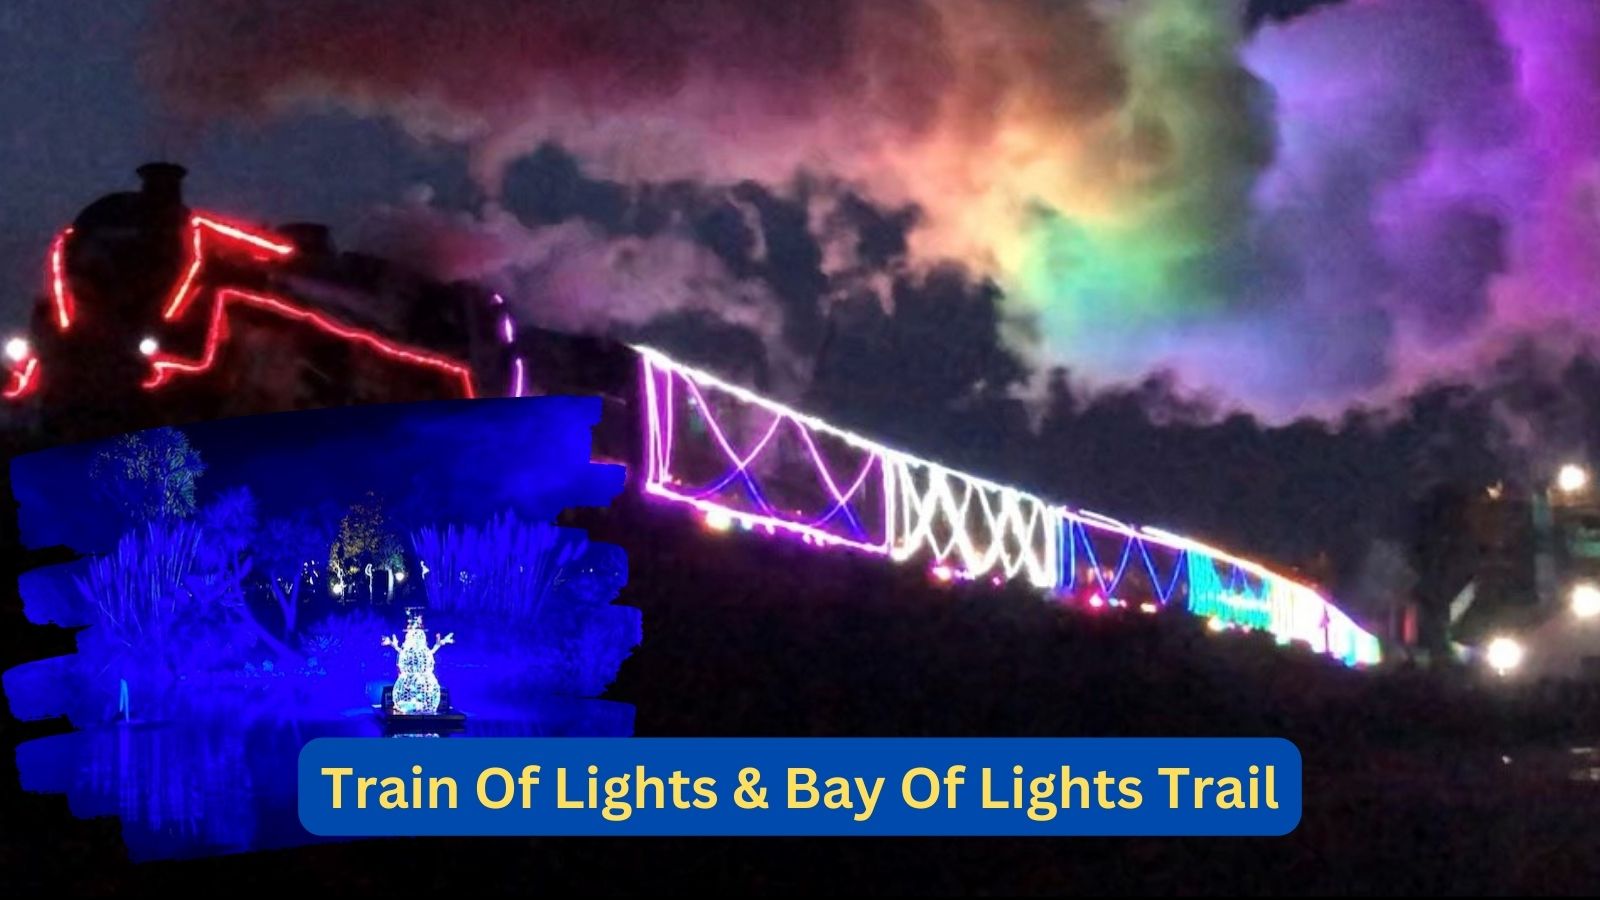 Train of lights and Bay of lights trail